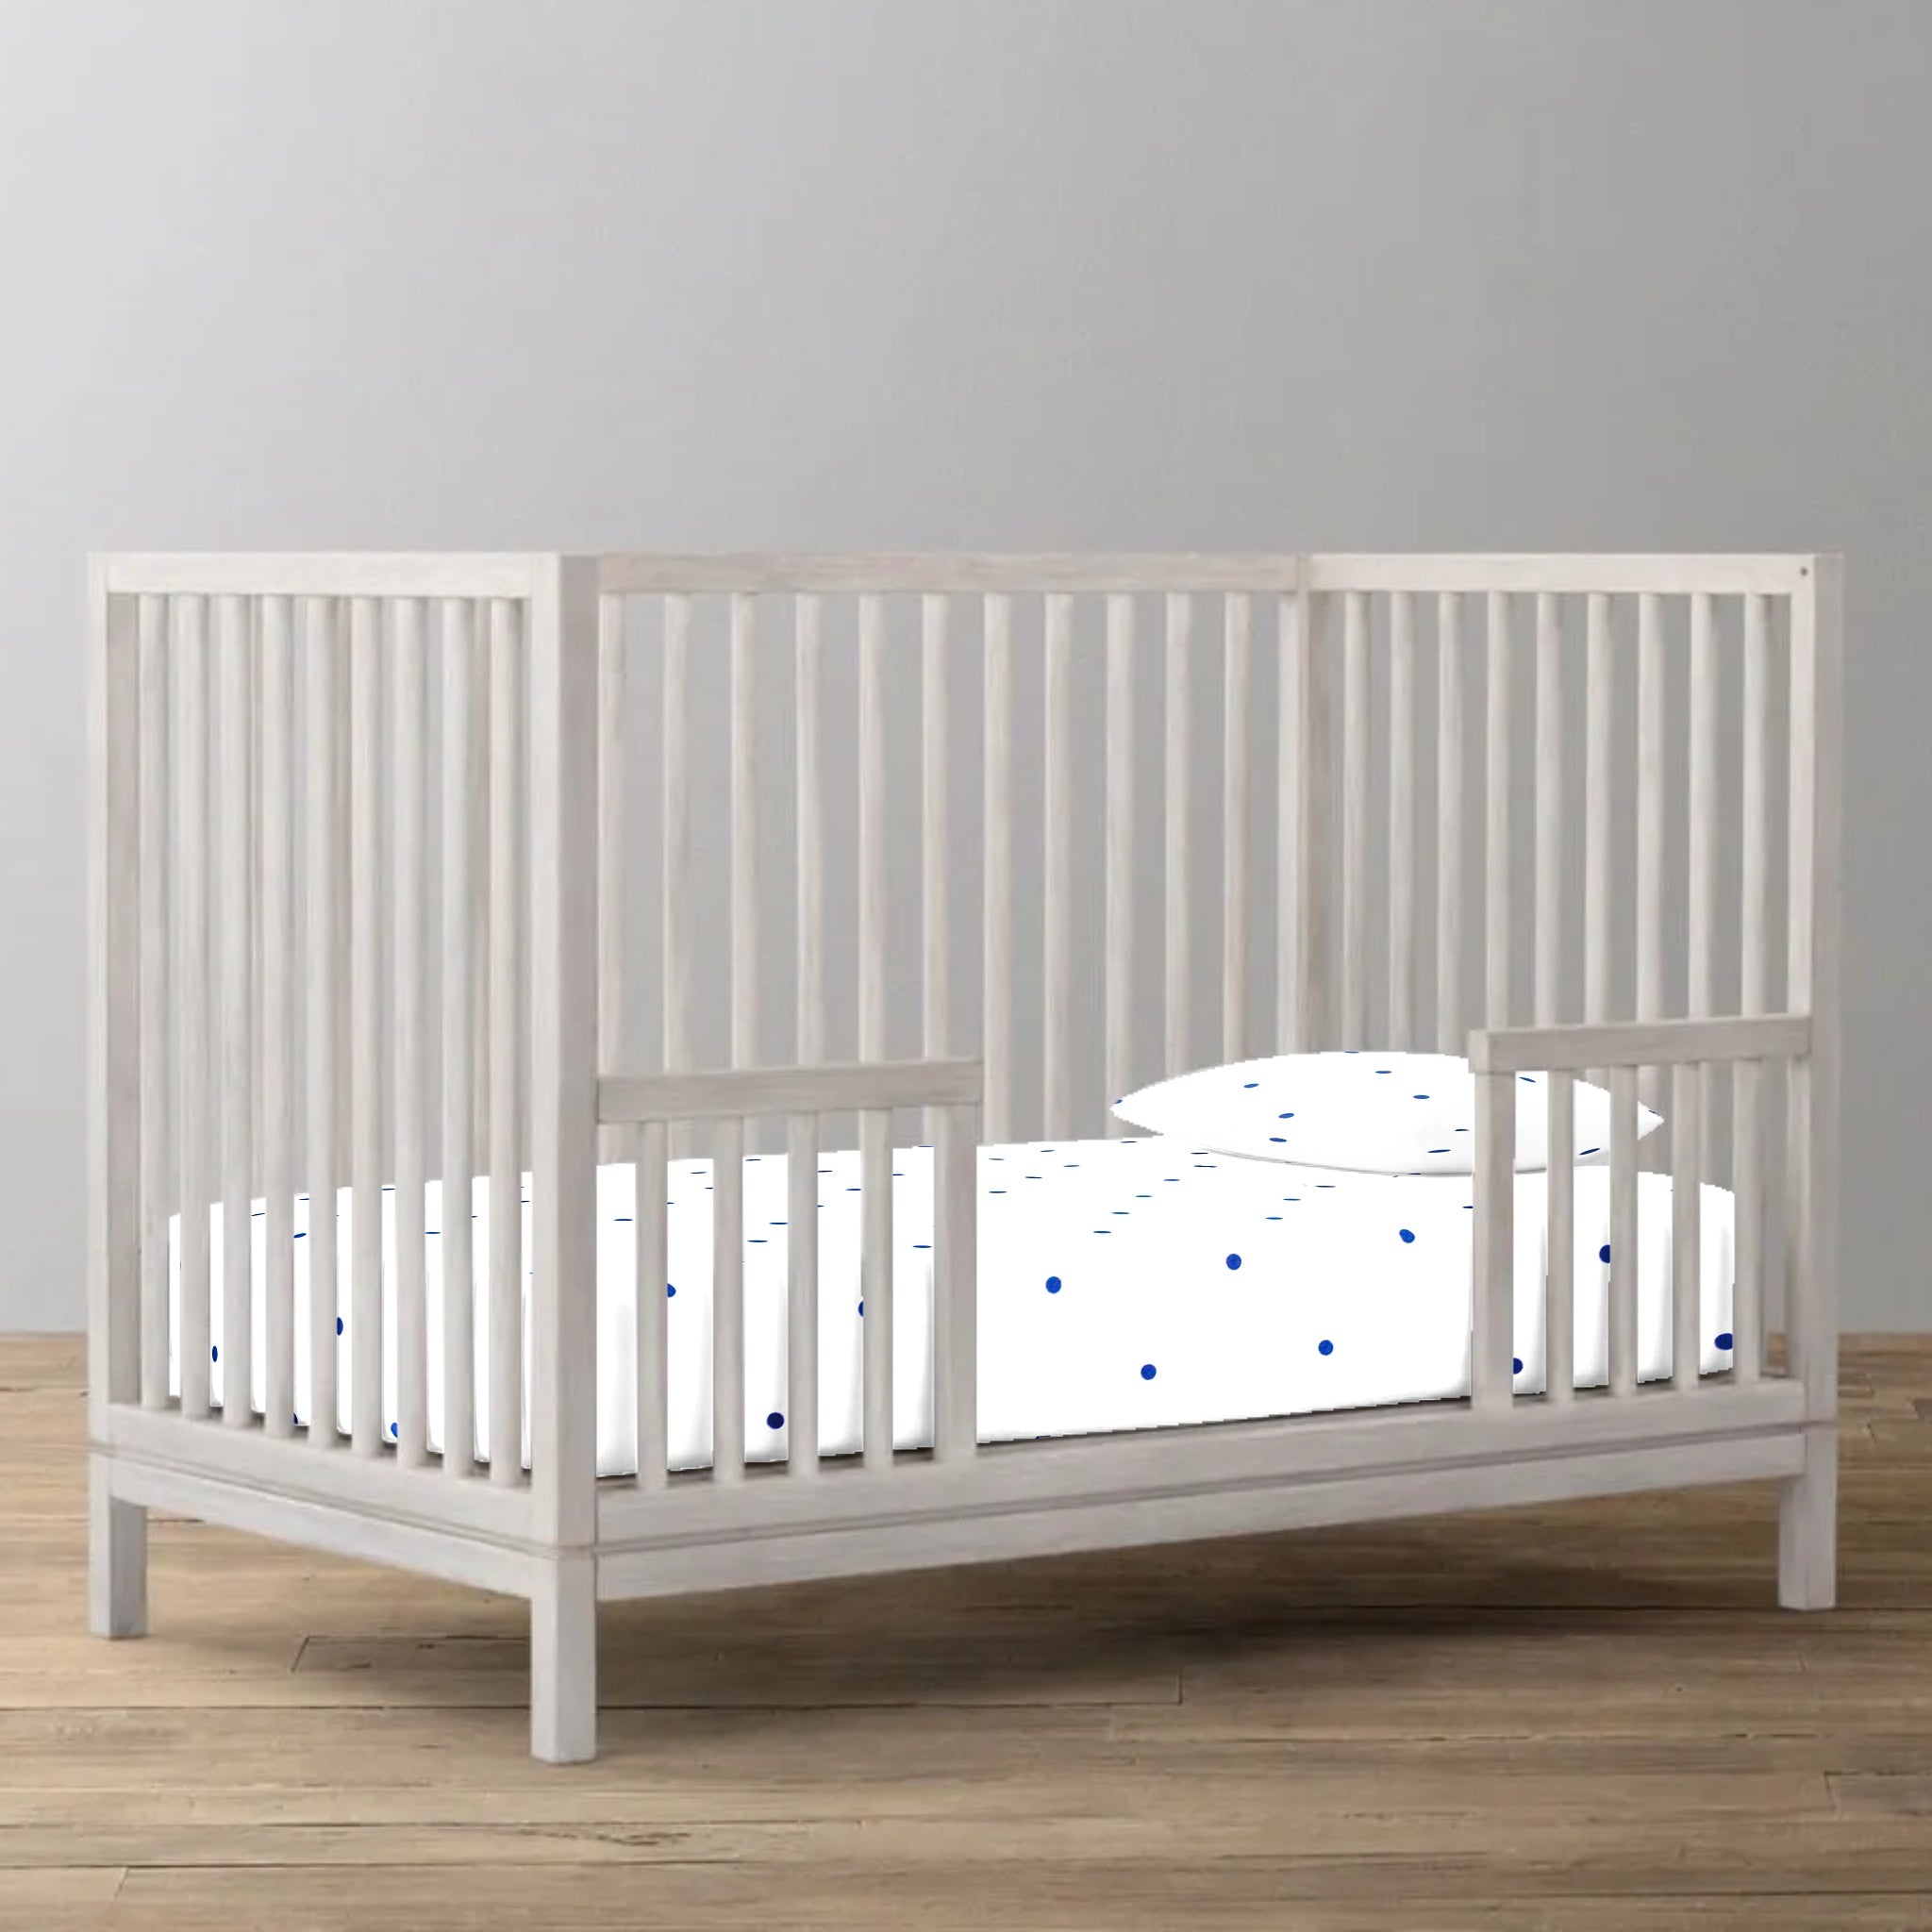 'Cream and Navy Dots’ Organic Fitted Crib Sheet